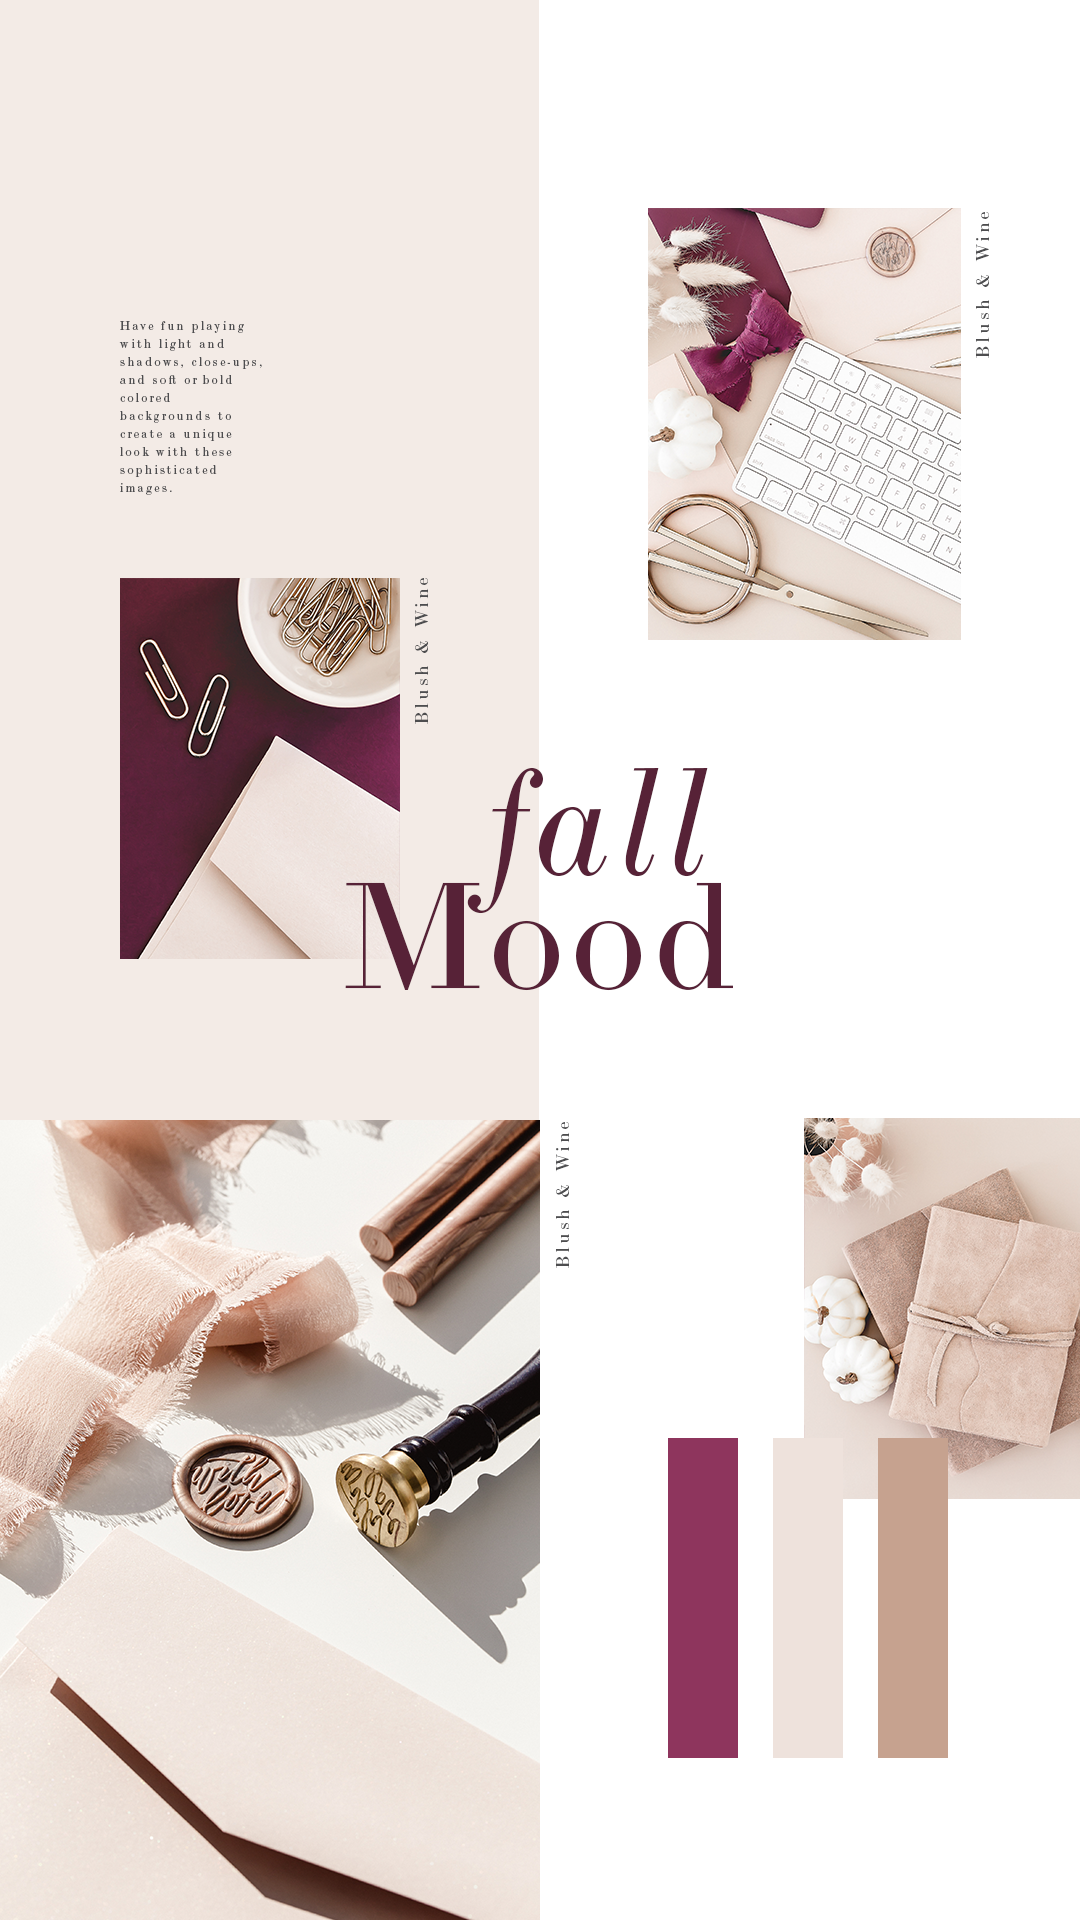 Blush and wine make the perfect pairing for a soft, feminine, fall color palette. This collection features stationery images for creative entrepreneurs, women business owners and bloggers.